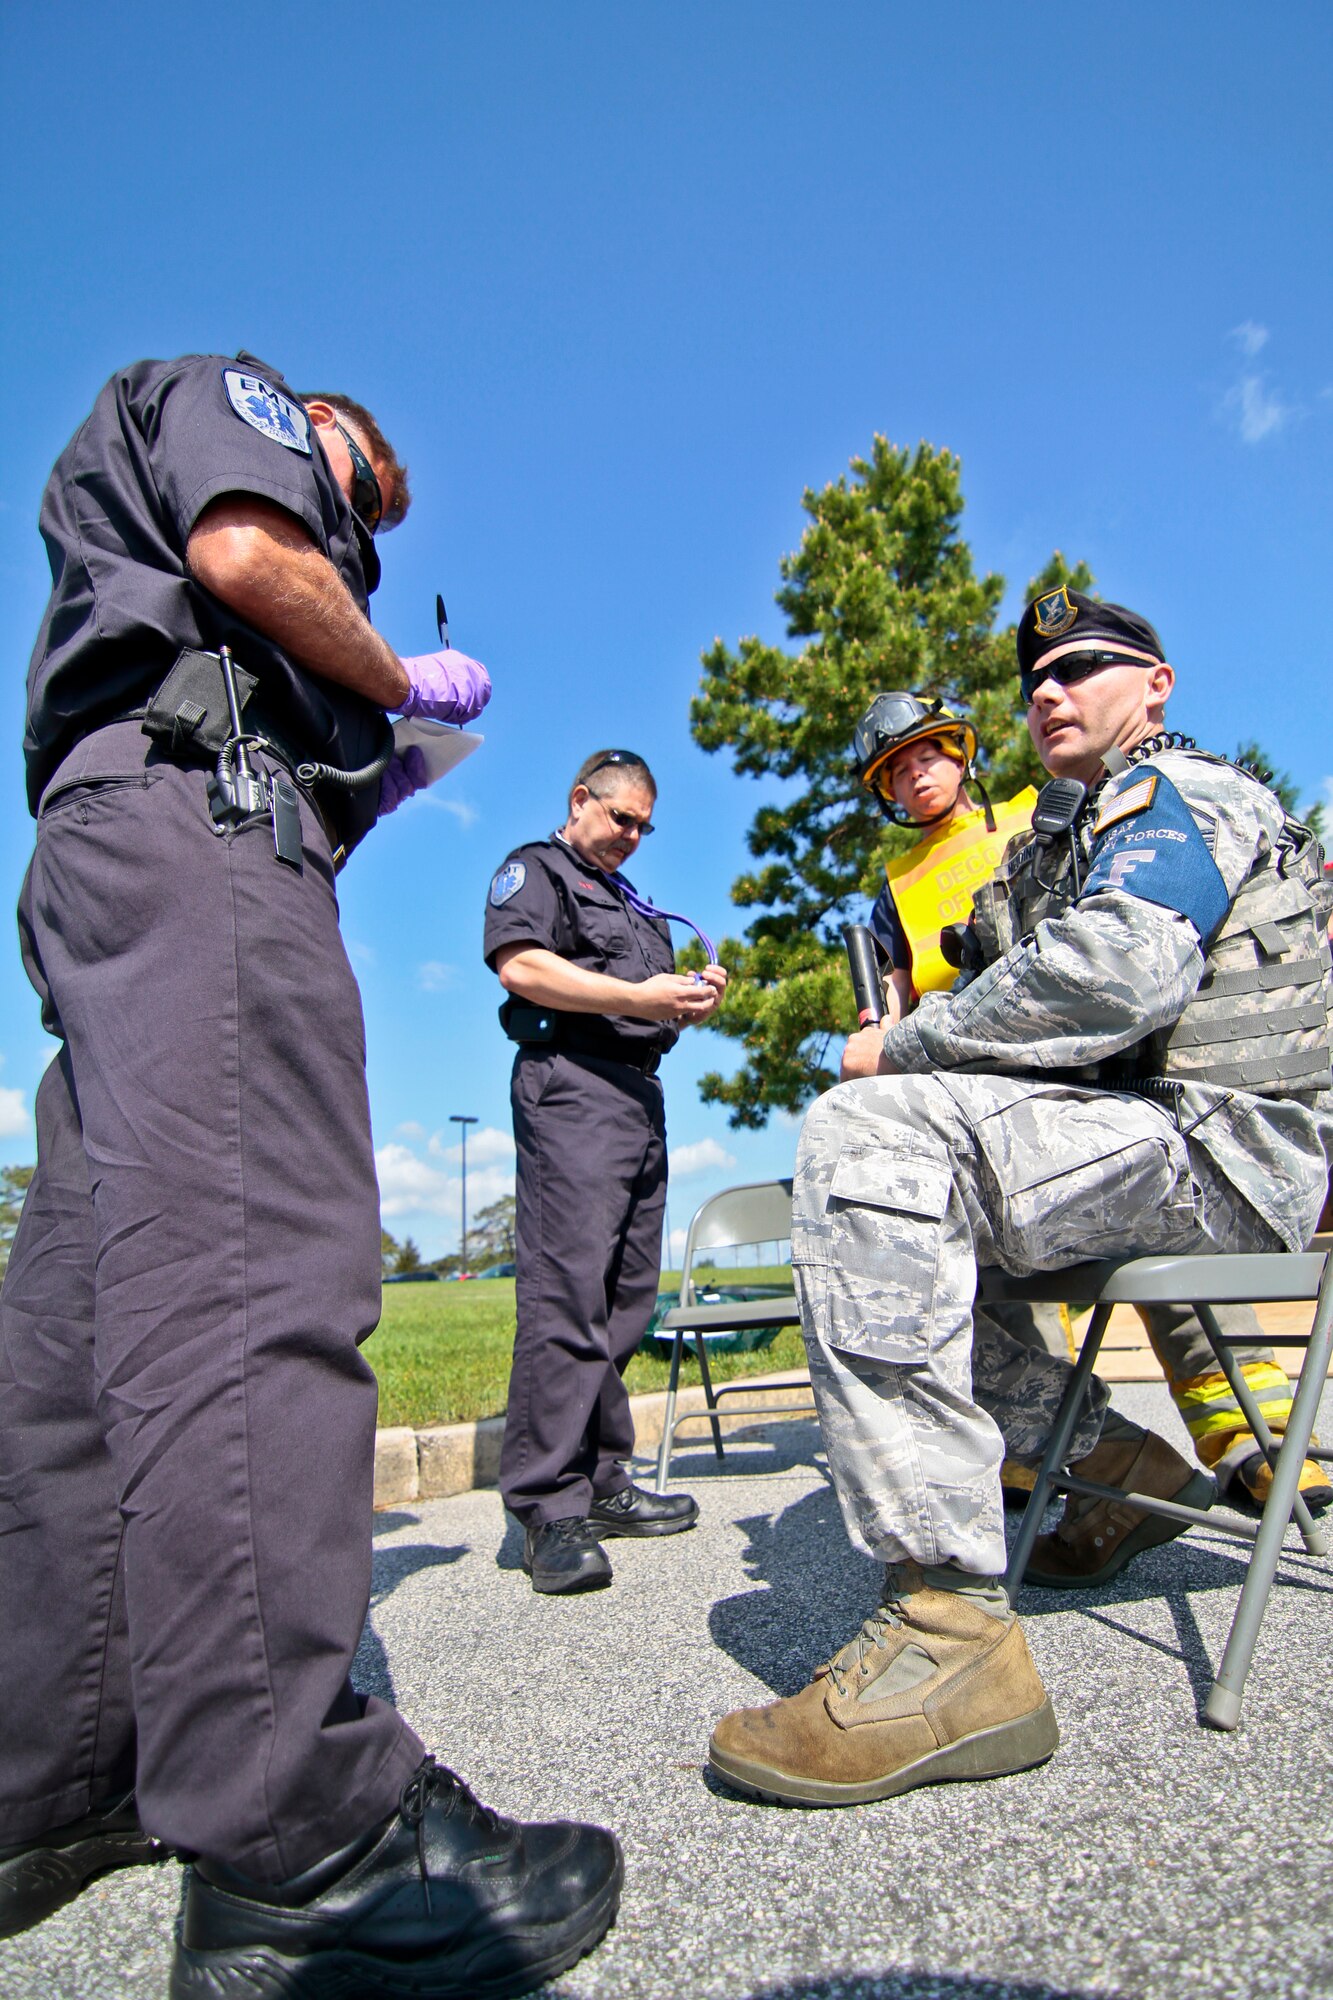 A picture of New Jersey Air National Guardsman Master Sgt. Donald Meddings being checked out by Emergency Medical Technicians.